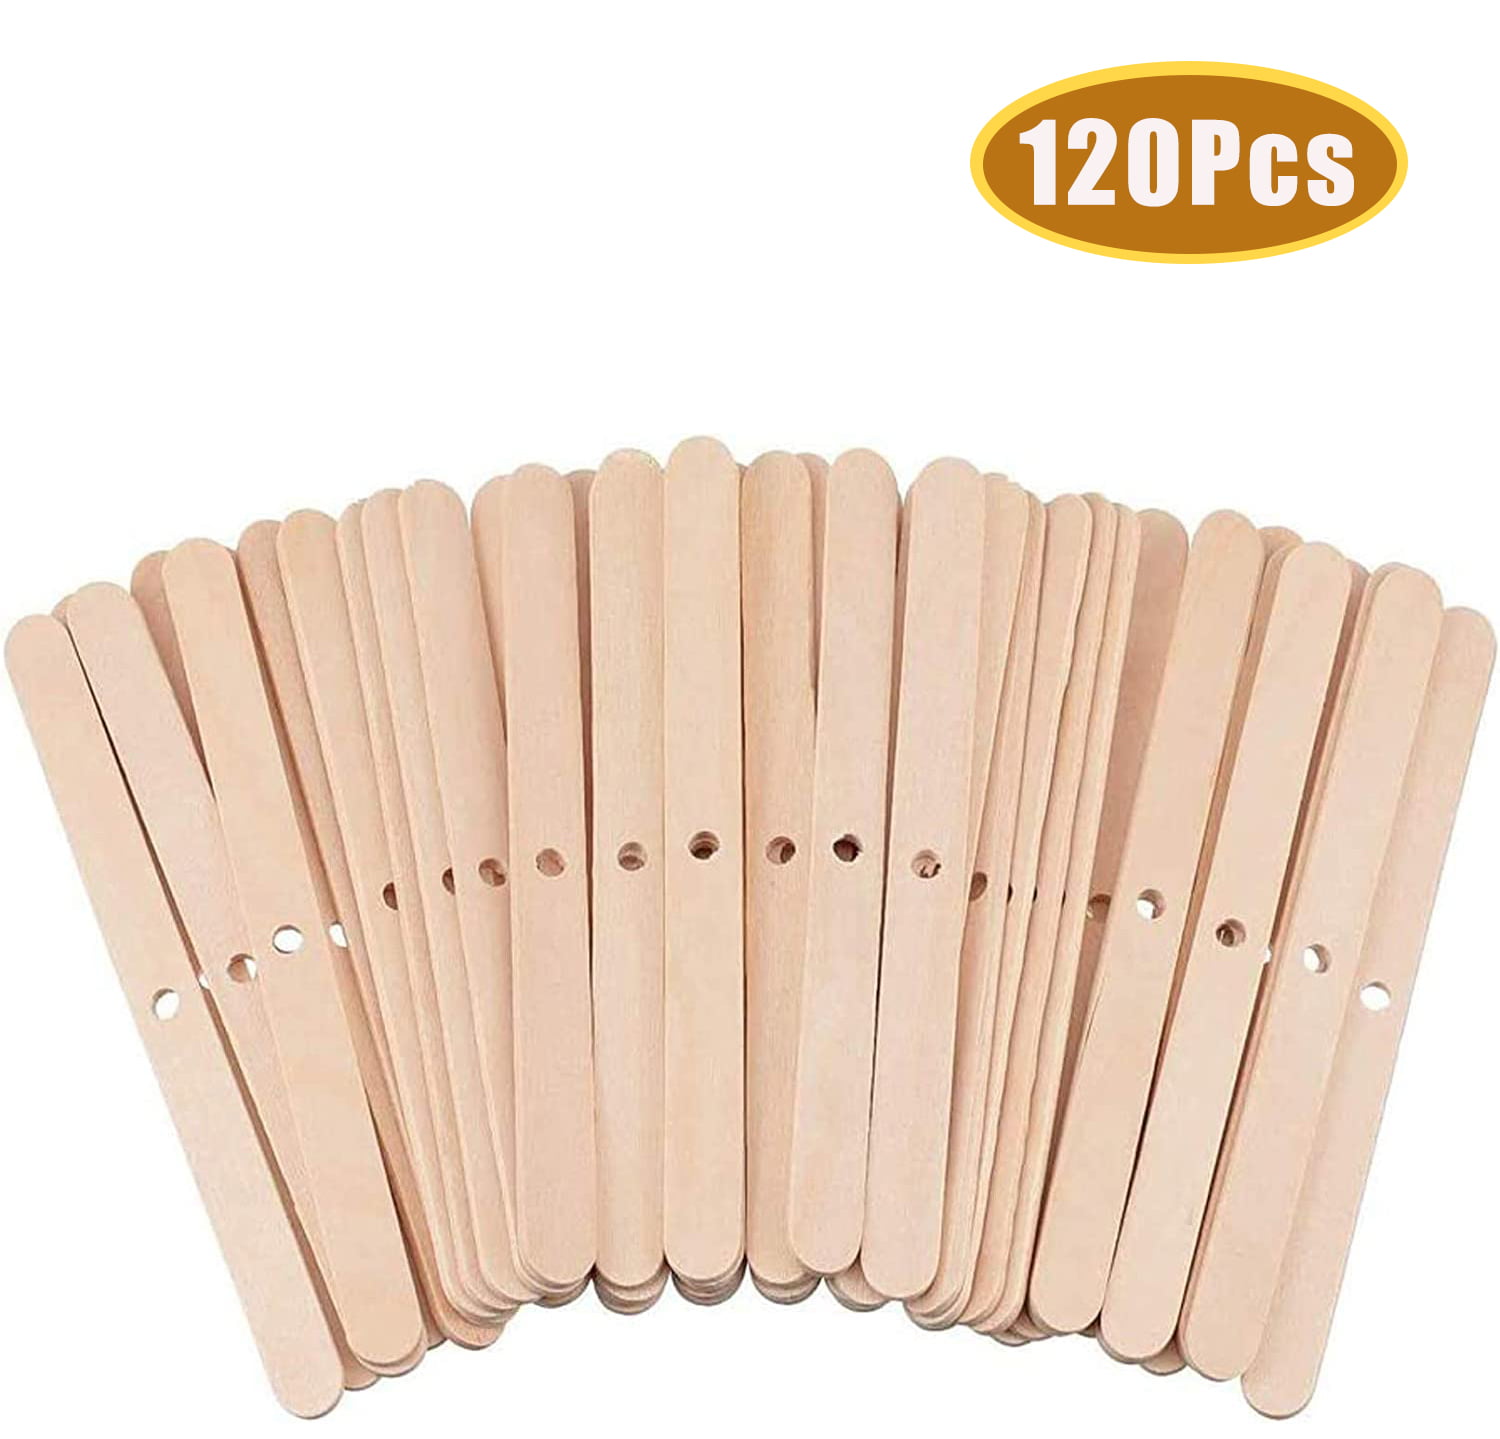 MILIVIXAY Wooden Candle Wick Holders,Candle Wicks Centering Device,Candle Wick Bars,Wick Holders for Candle Making,Wick Clips for Candles,Candle Centering Tool,120 Pack,Multicolor 